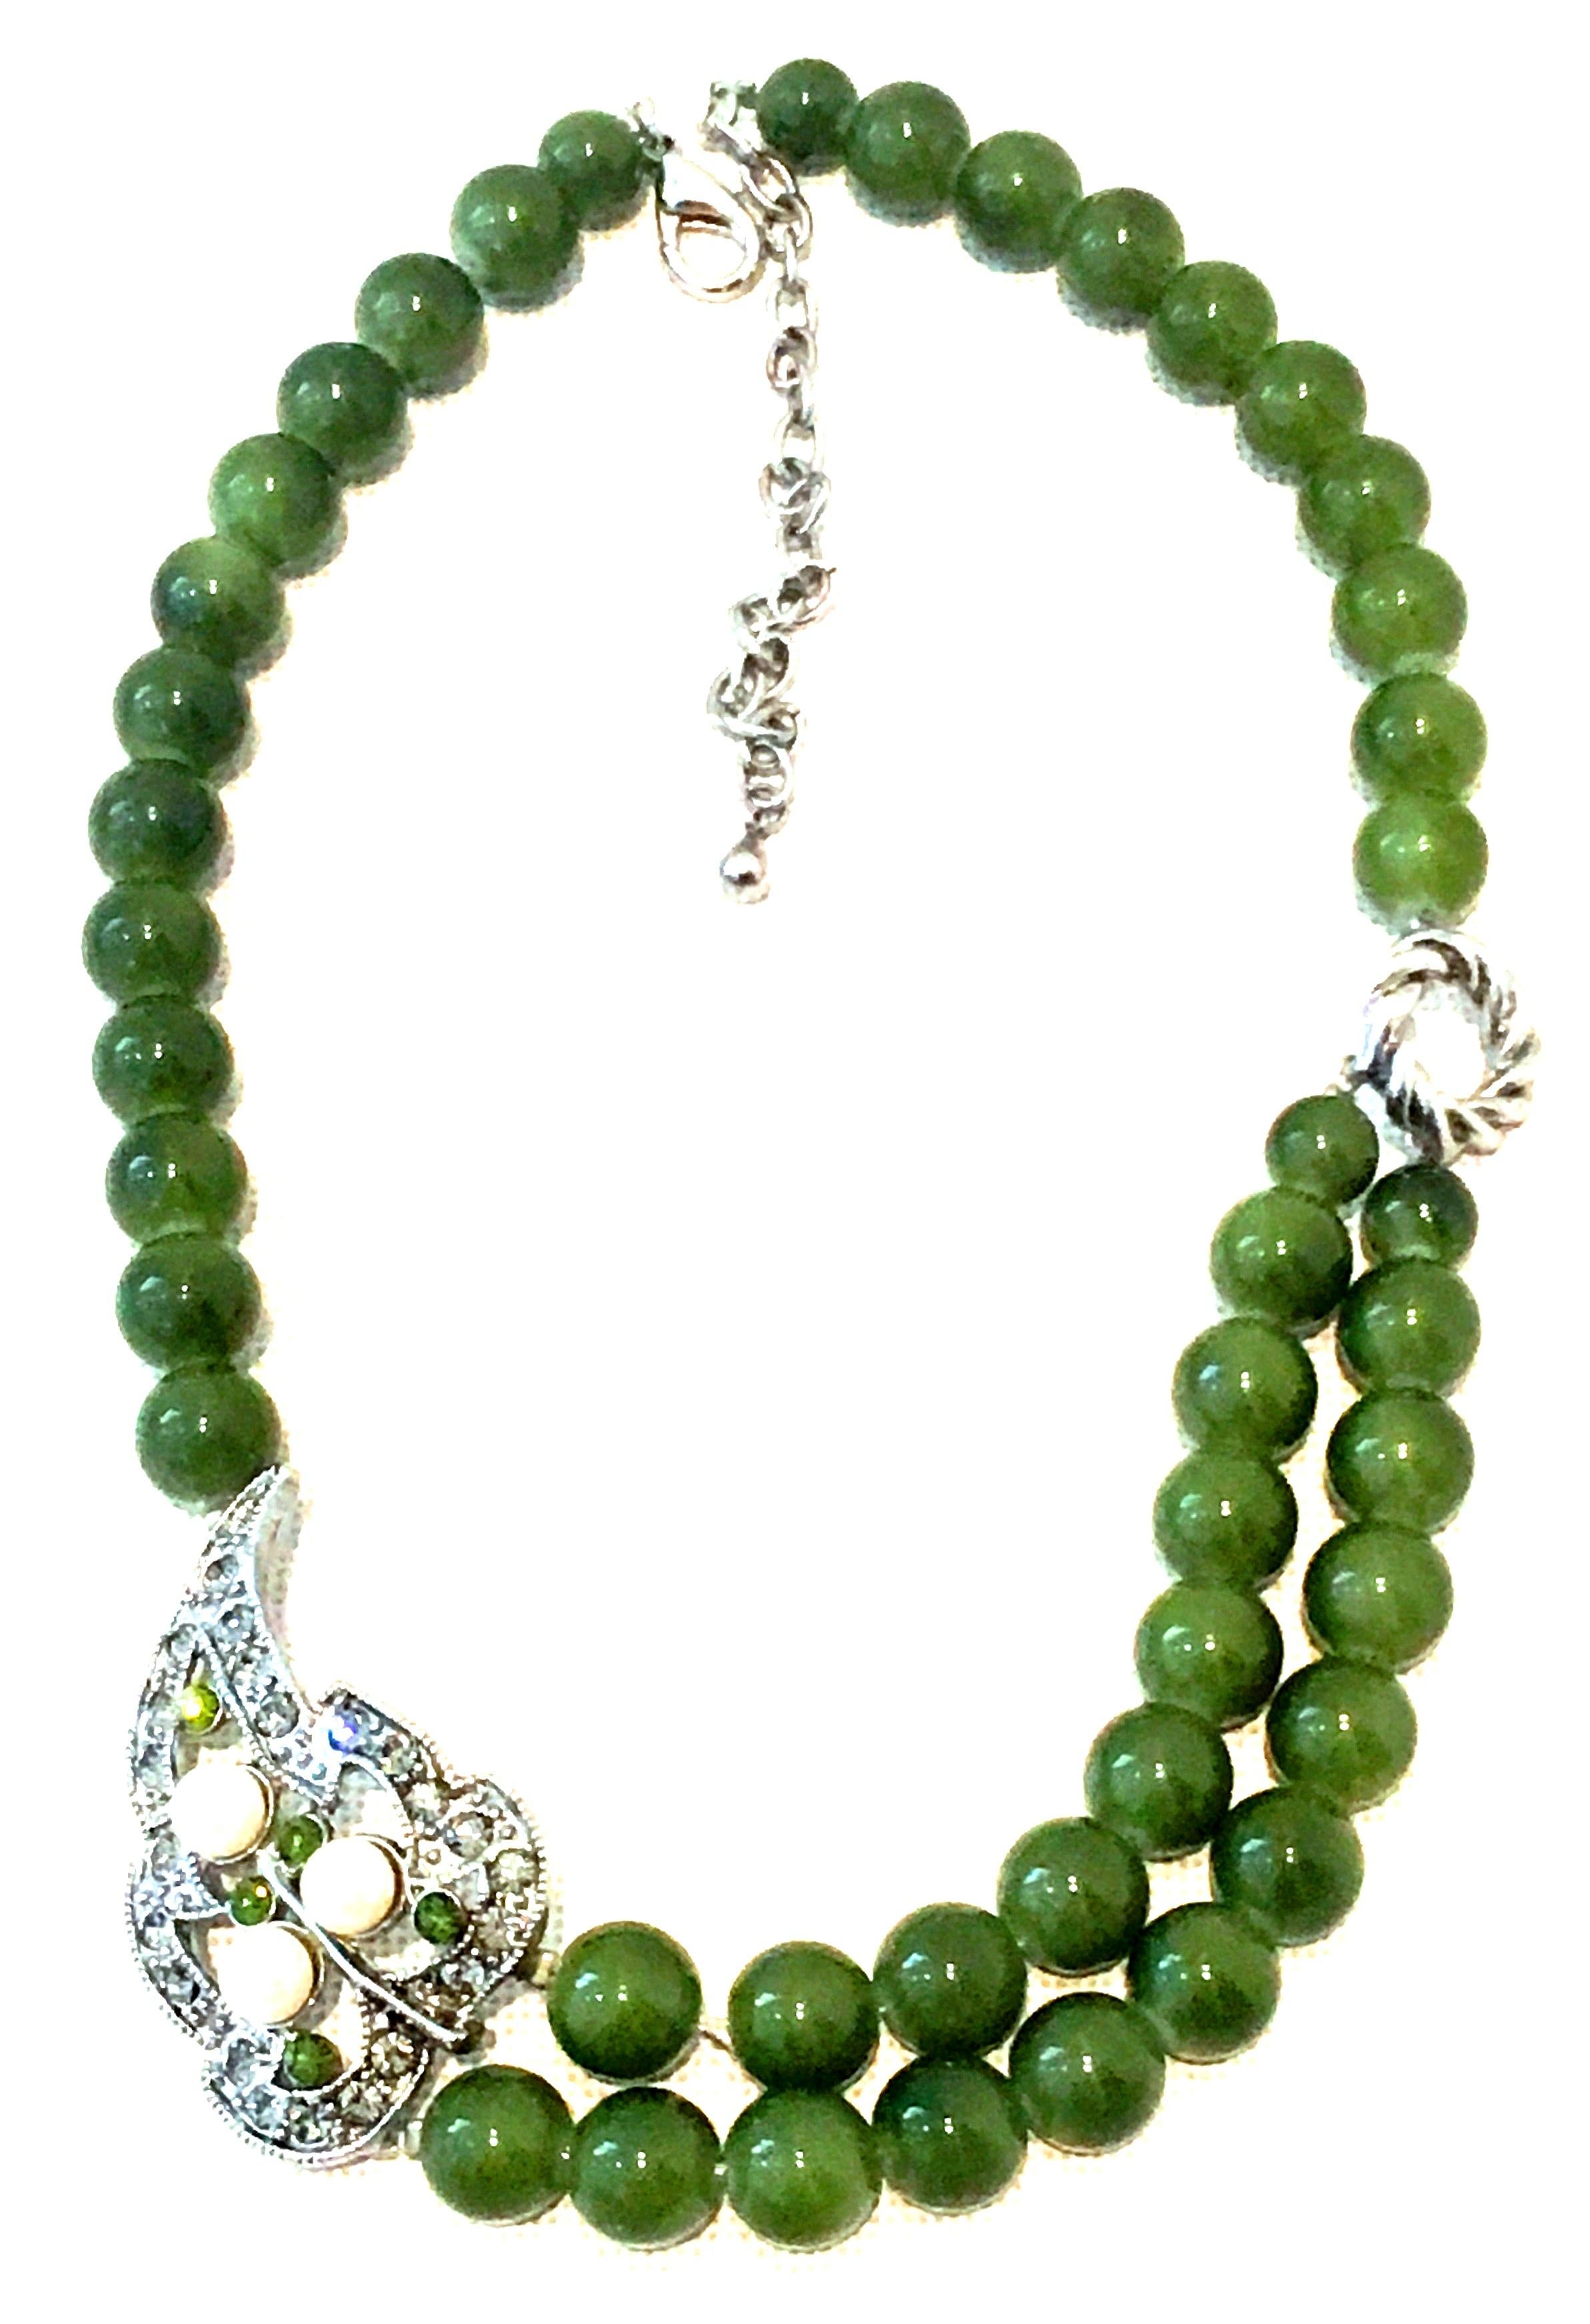 20th Century Silver, Austrian Crystal, Faux Pearl & Faux Jade Glass Bead Necklace. This choker style necklace features a central double strand of faux jade glass beads with an off center silver ornament. The ornament is curved with Austrian crystal